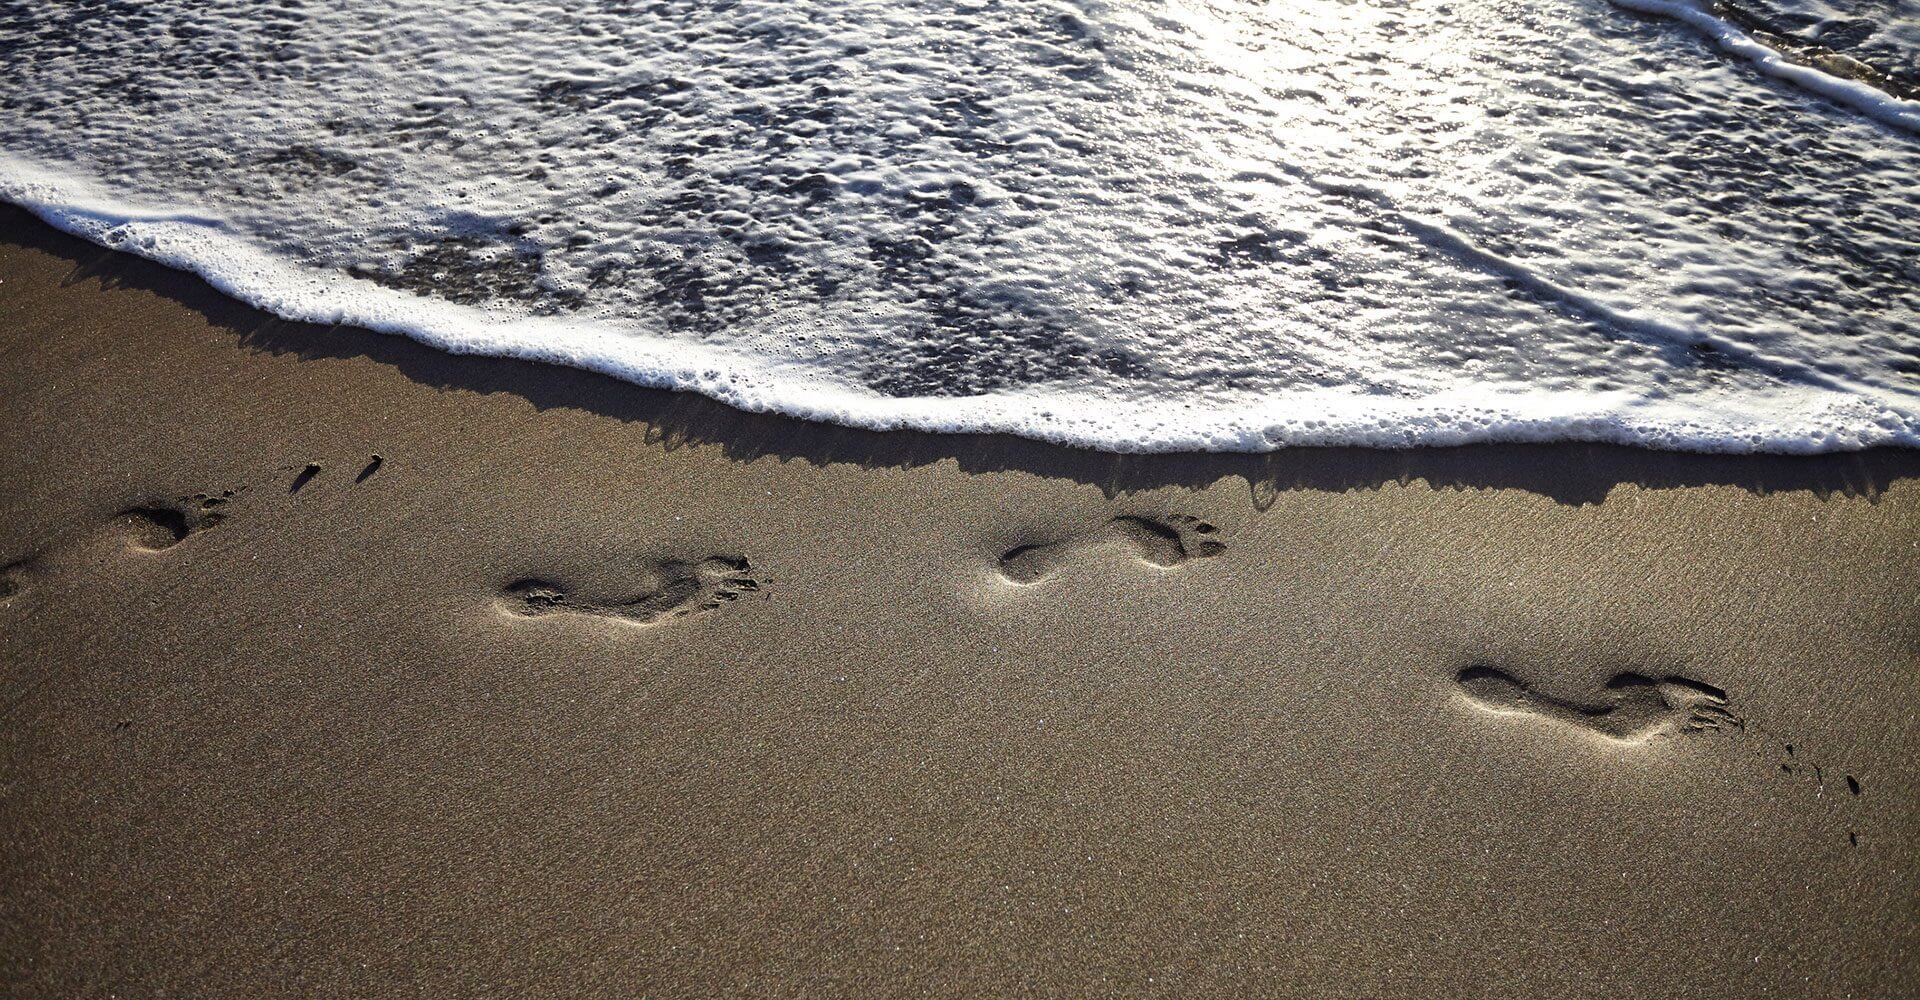 The waves rush over new footprints, just as inflation ebbs and flows.